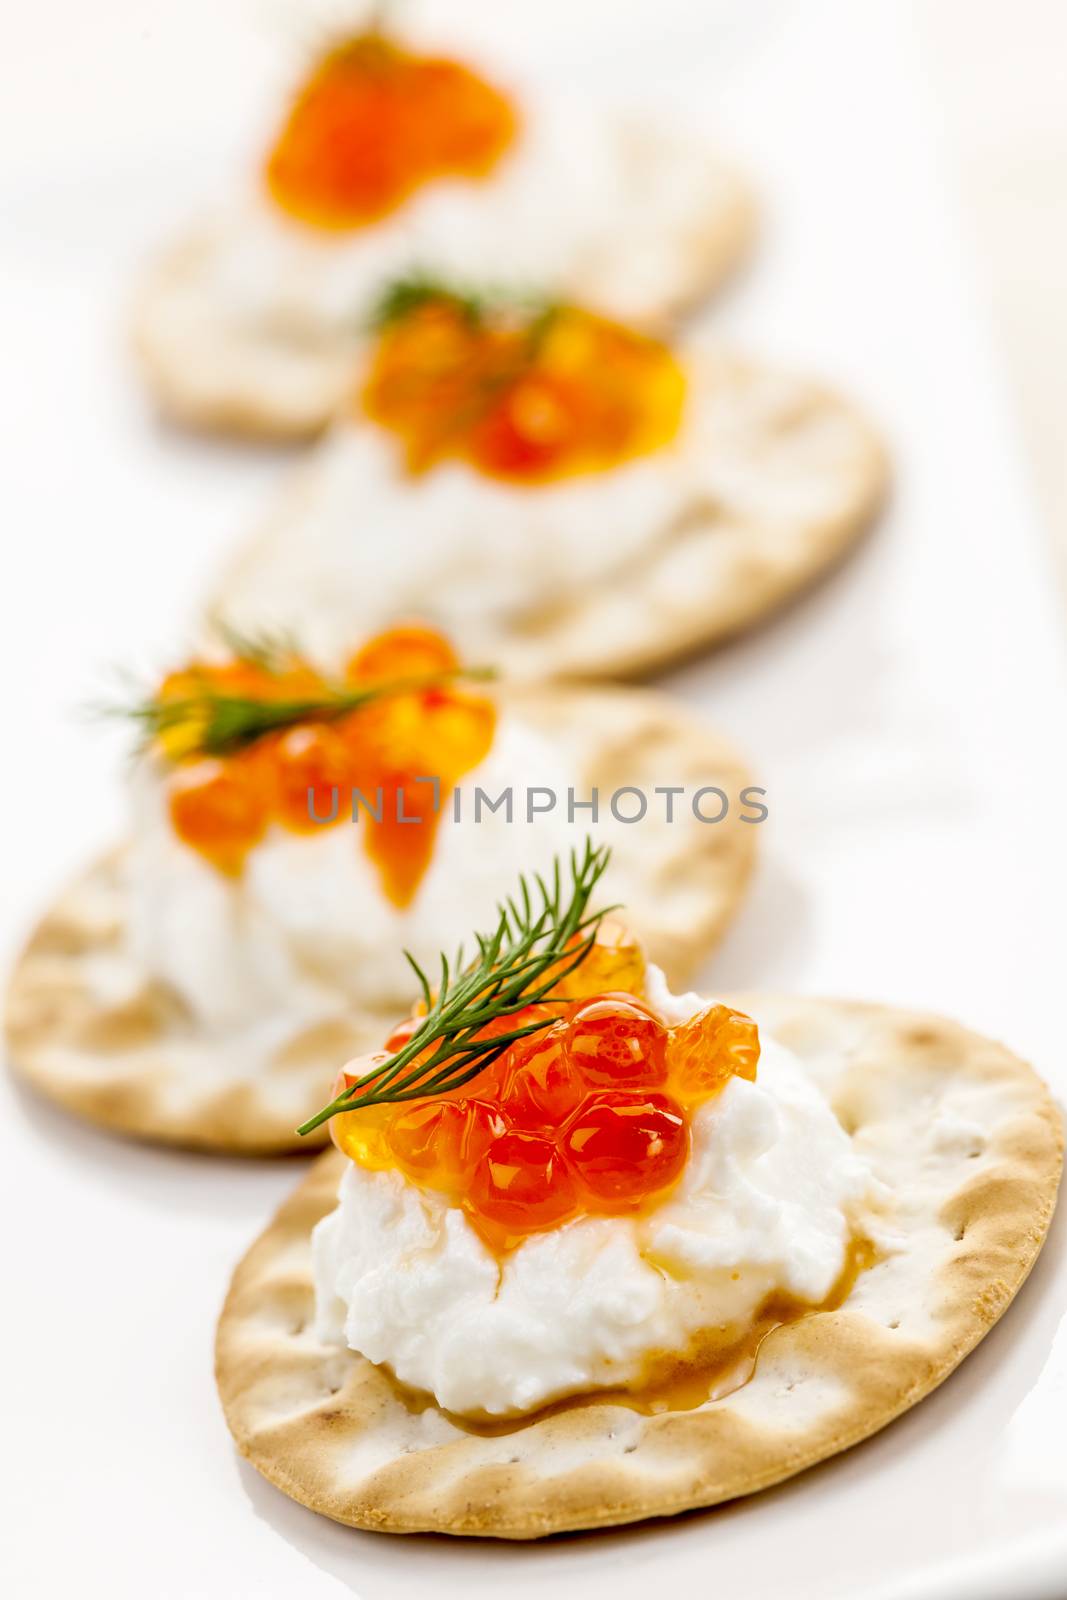 Caviar appetizers by elenathewise